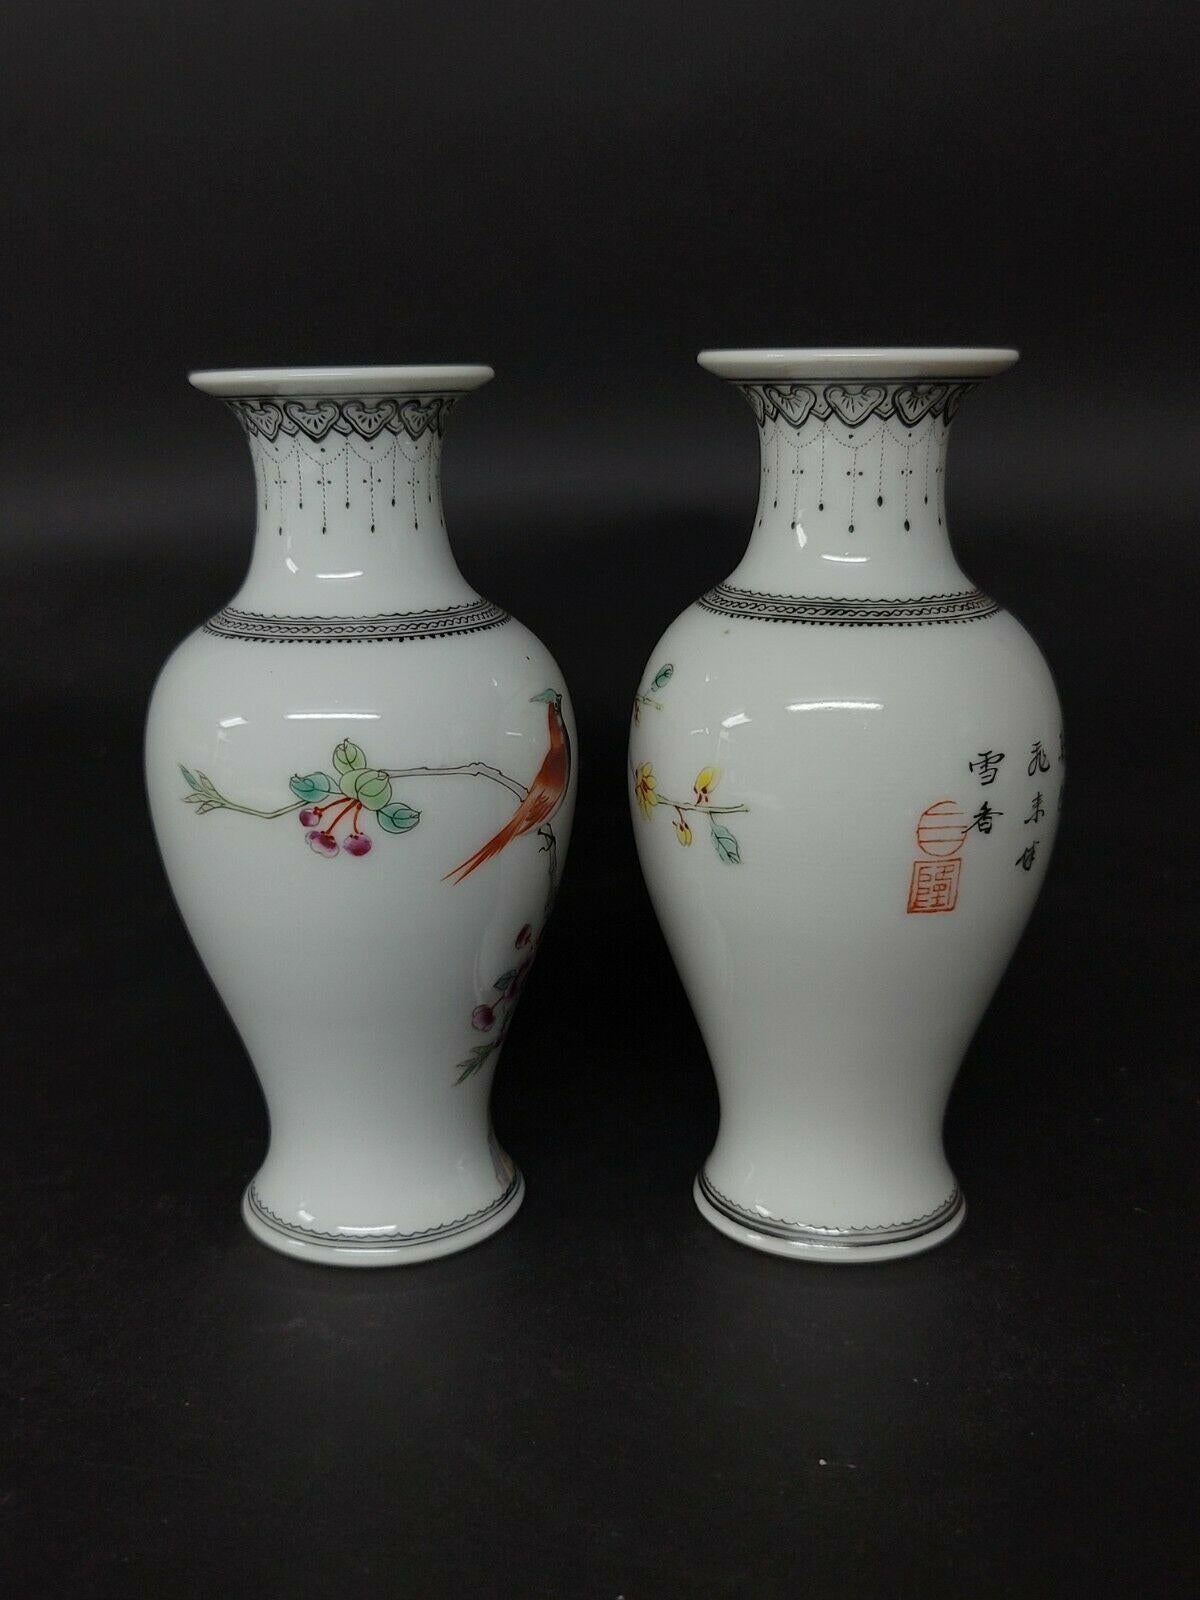 Small Matching Pair of Famille Rose Chinese Famille Rose Porcelain Vases In Excellent Condition For Sale In Norton, MA